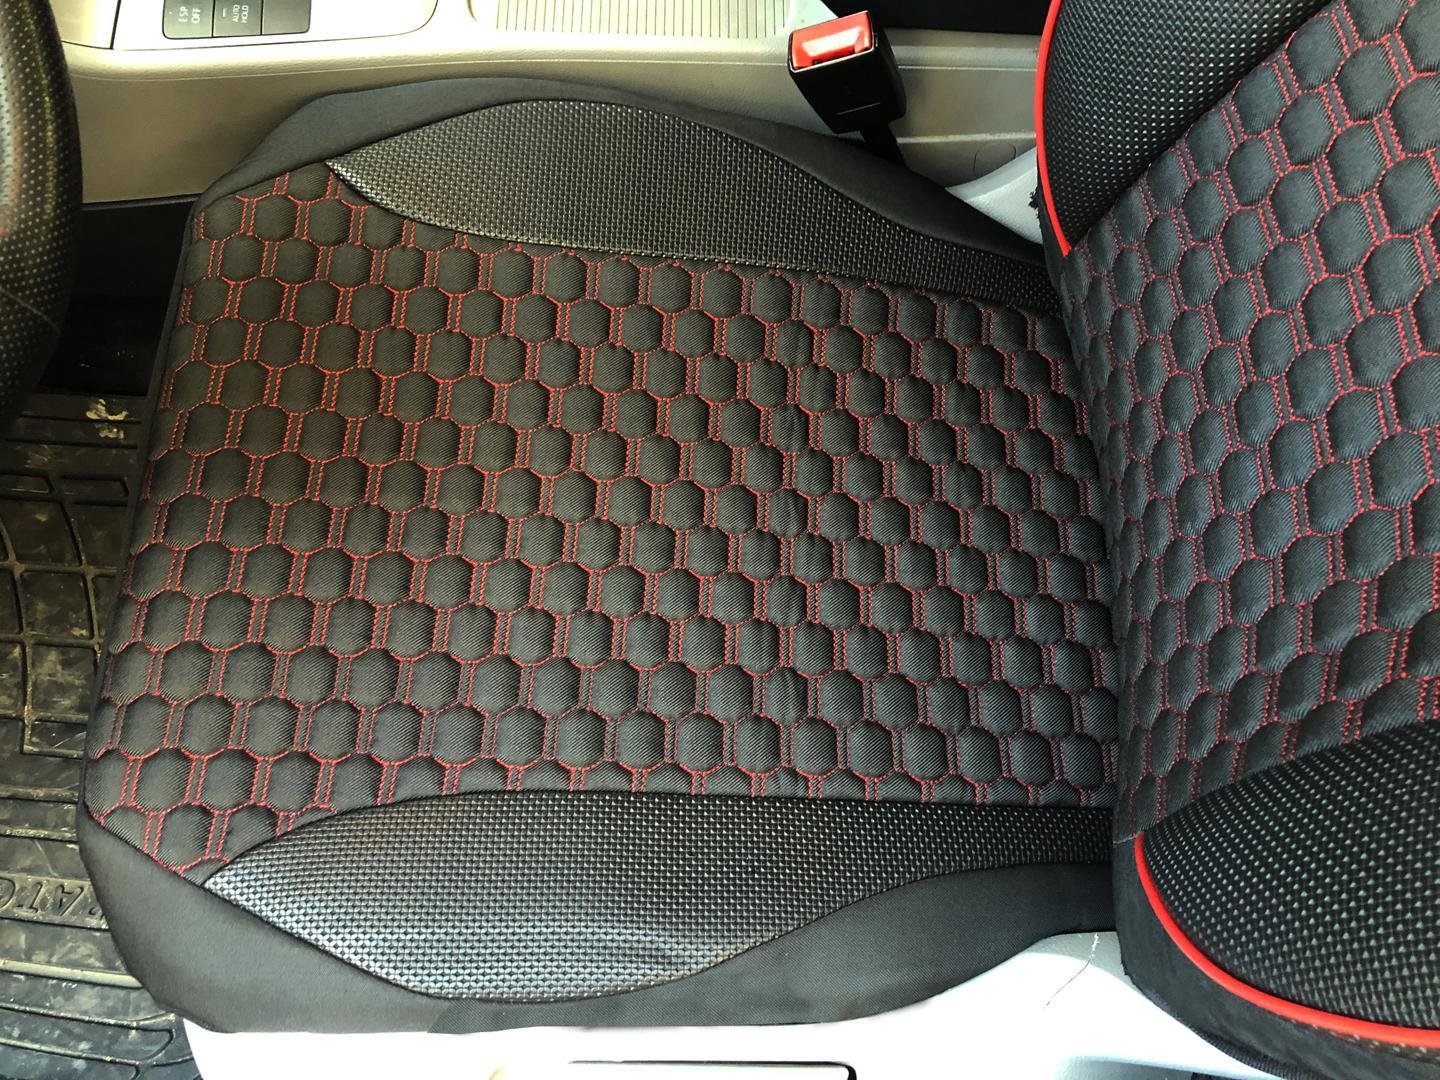 FIAT QUBO BLACK FRONT NYLON WATERPROOF CAR SEAT COVER SET 2009 on 